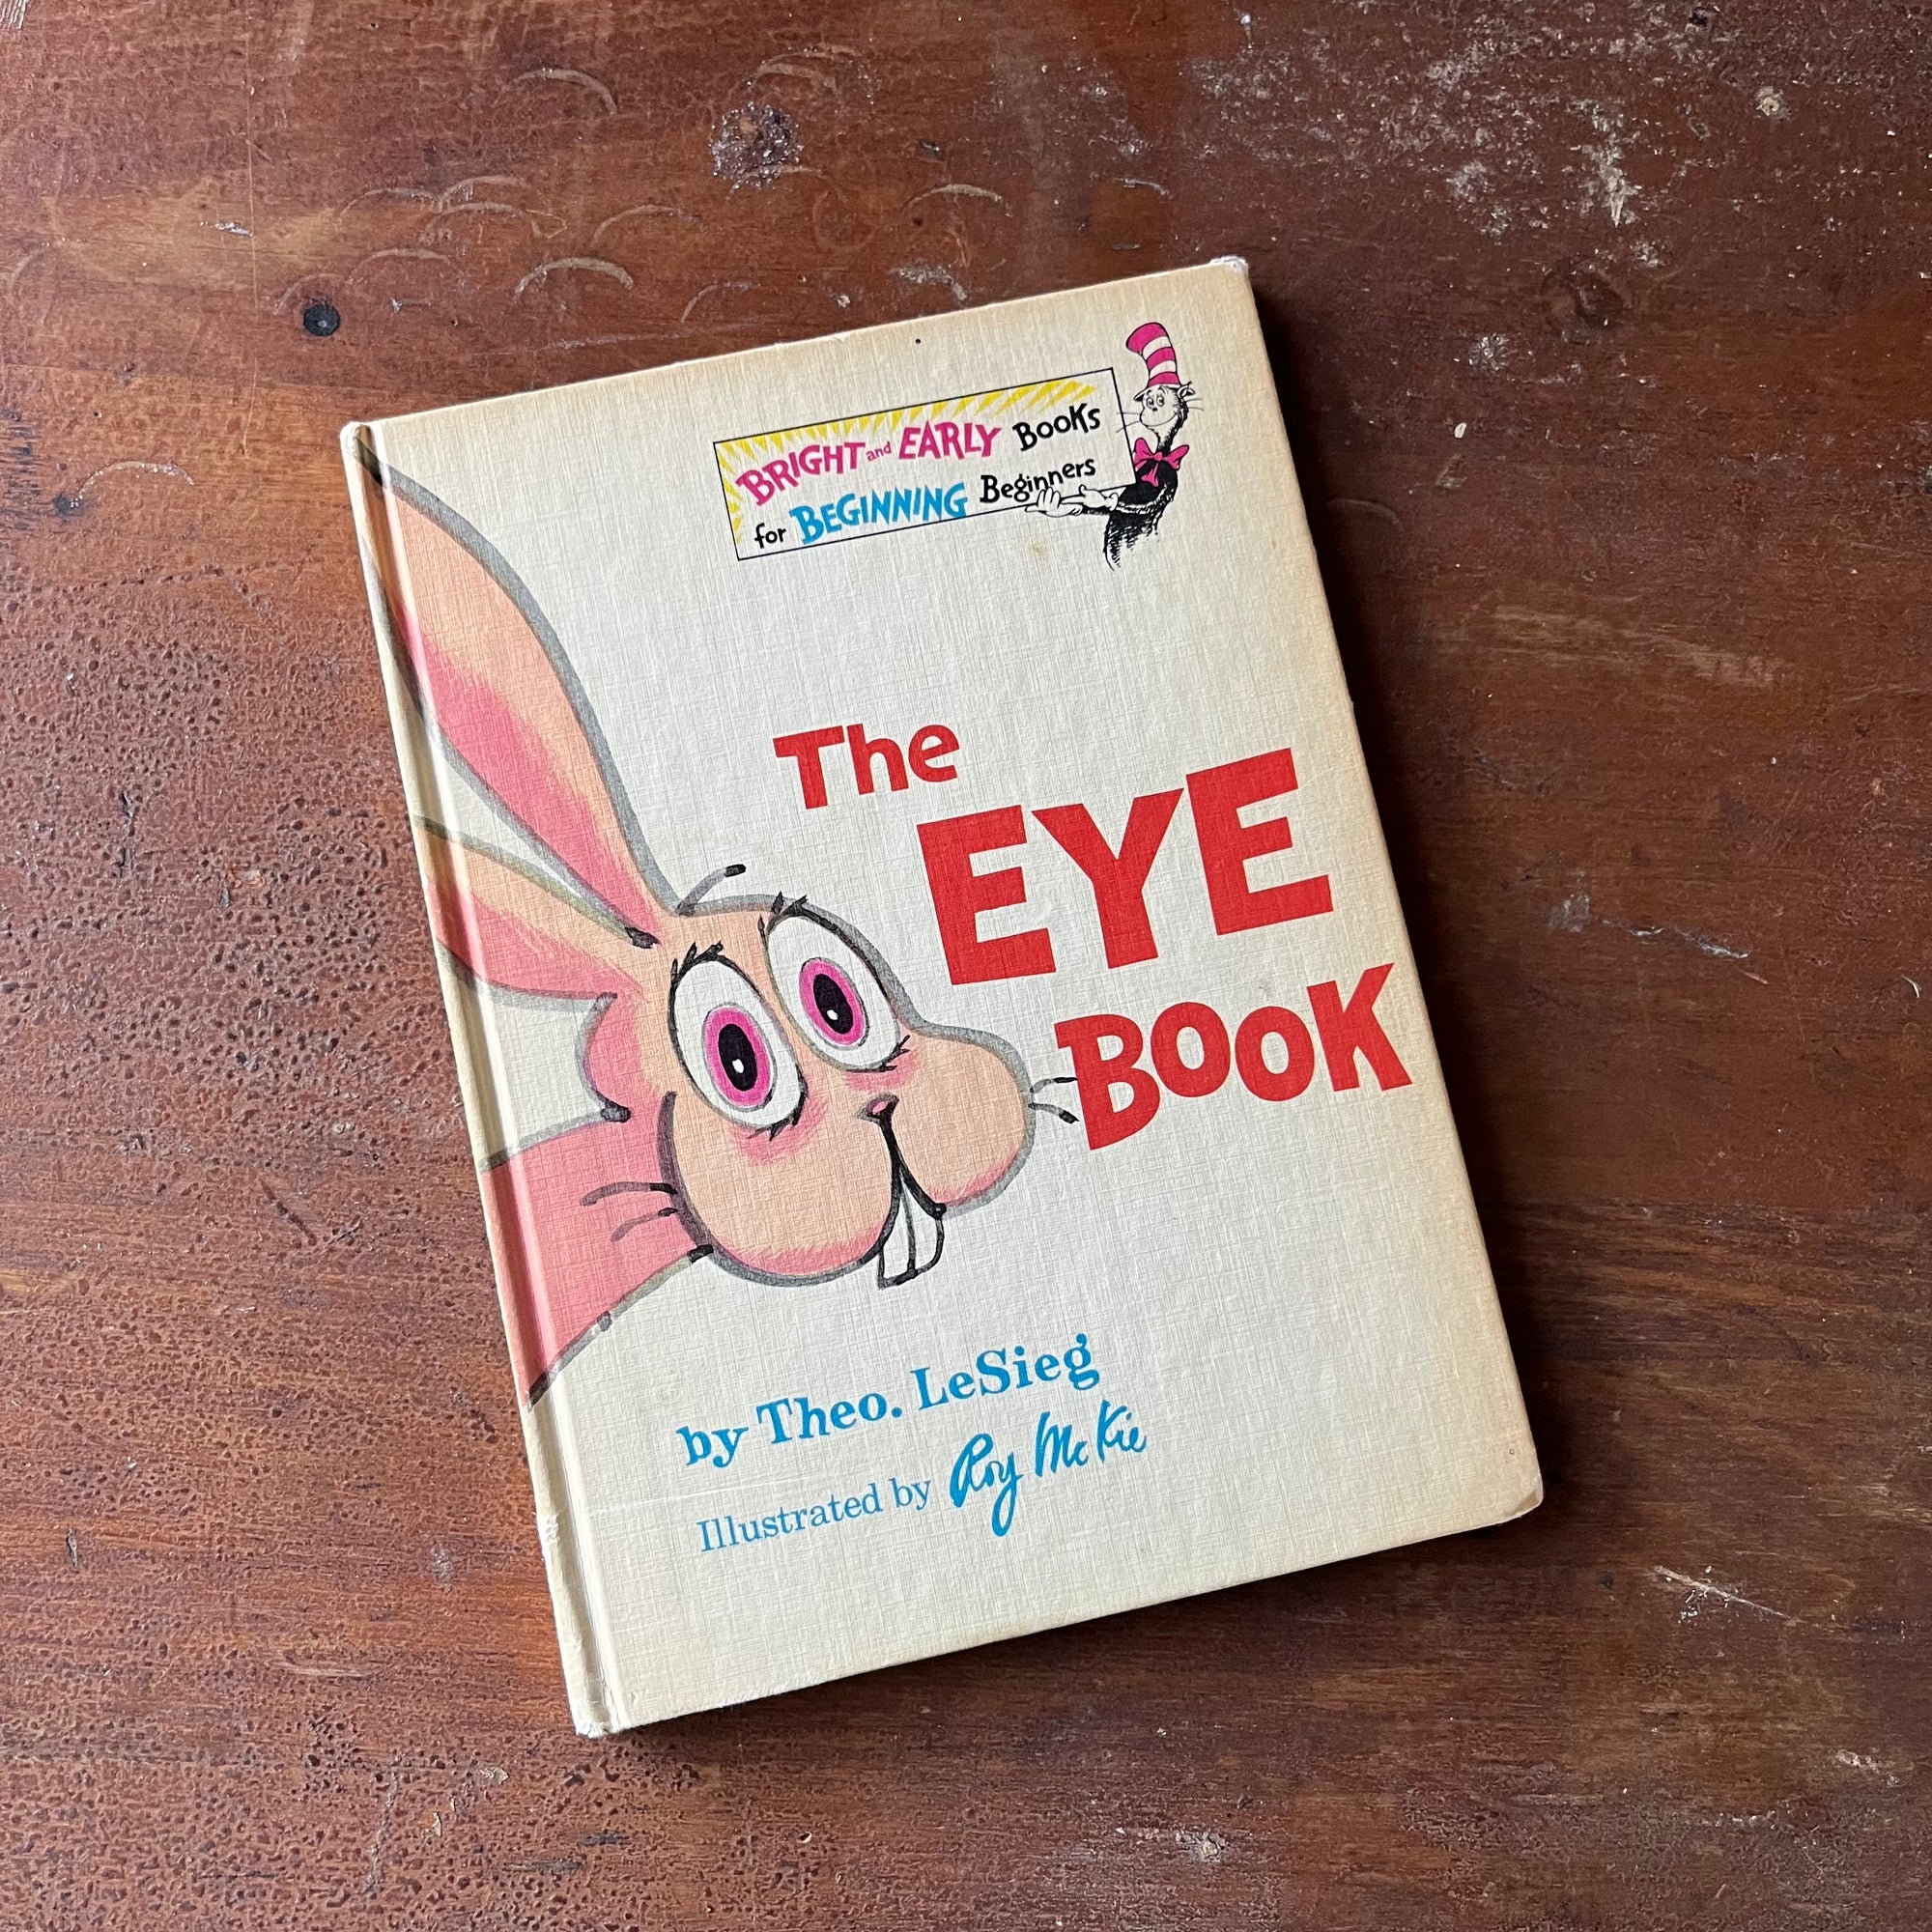 The Eye Book by Theo LeSieg-Bright & Early Books for Beginning Beginners-1968 Edition-vintage children's picture book-Dr. Seuss Book-view of the front cover with a pink rabbit with big teeth & eyes